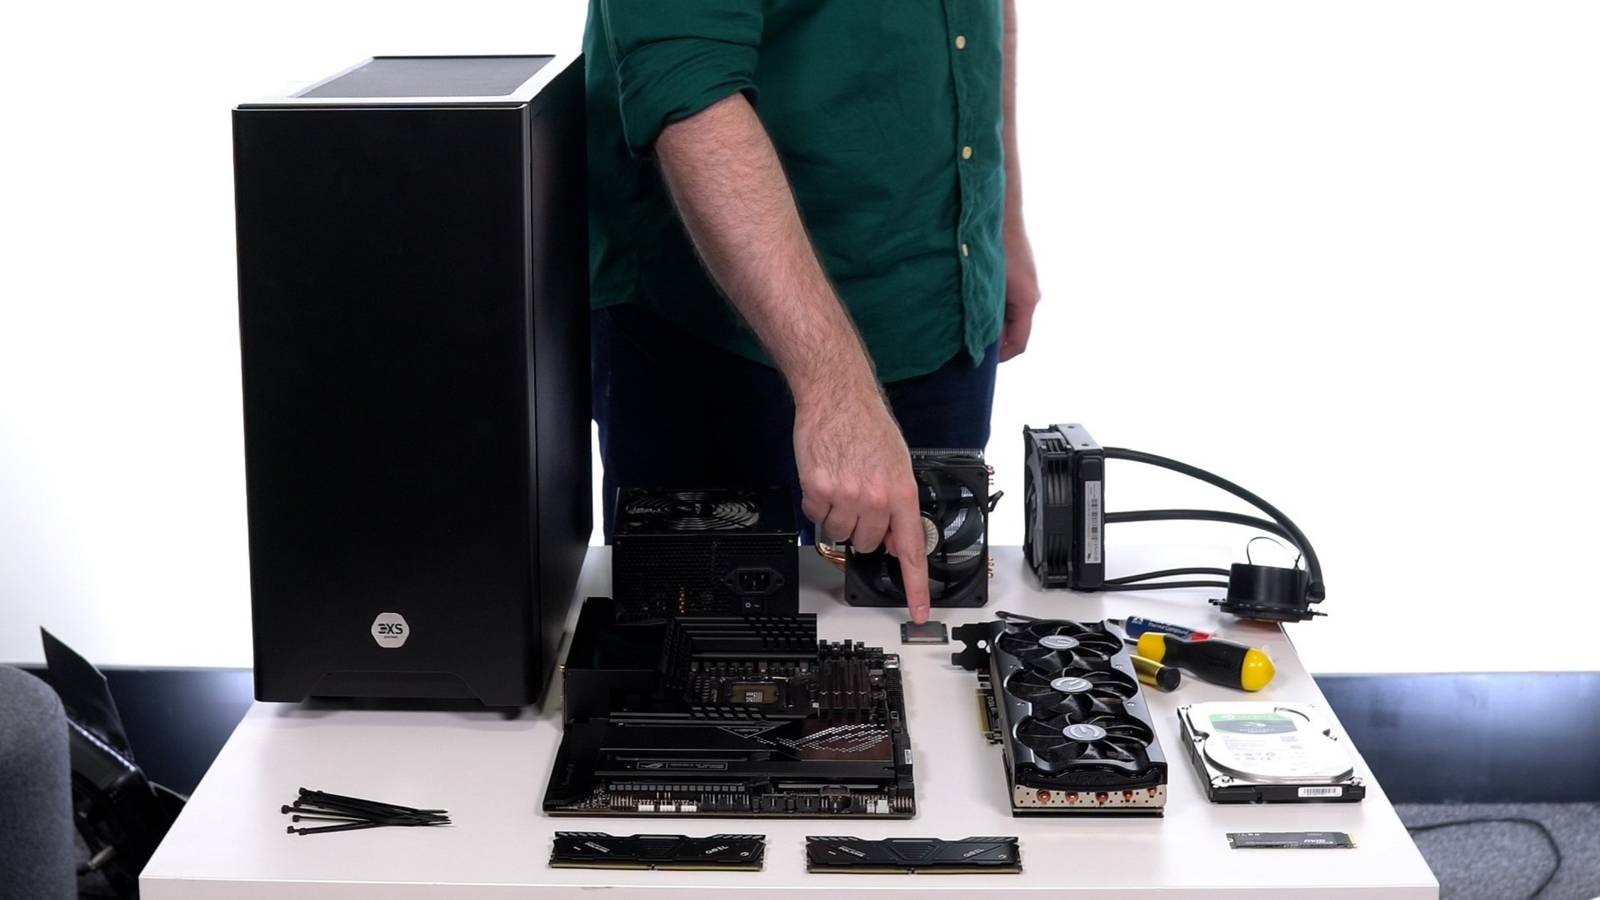 How to build a PC: Beginner's guide